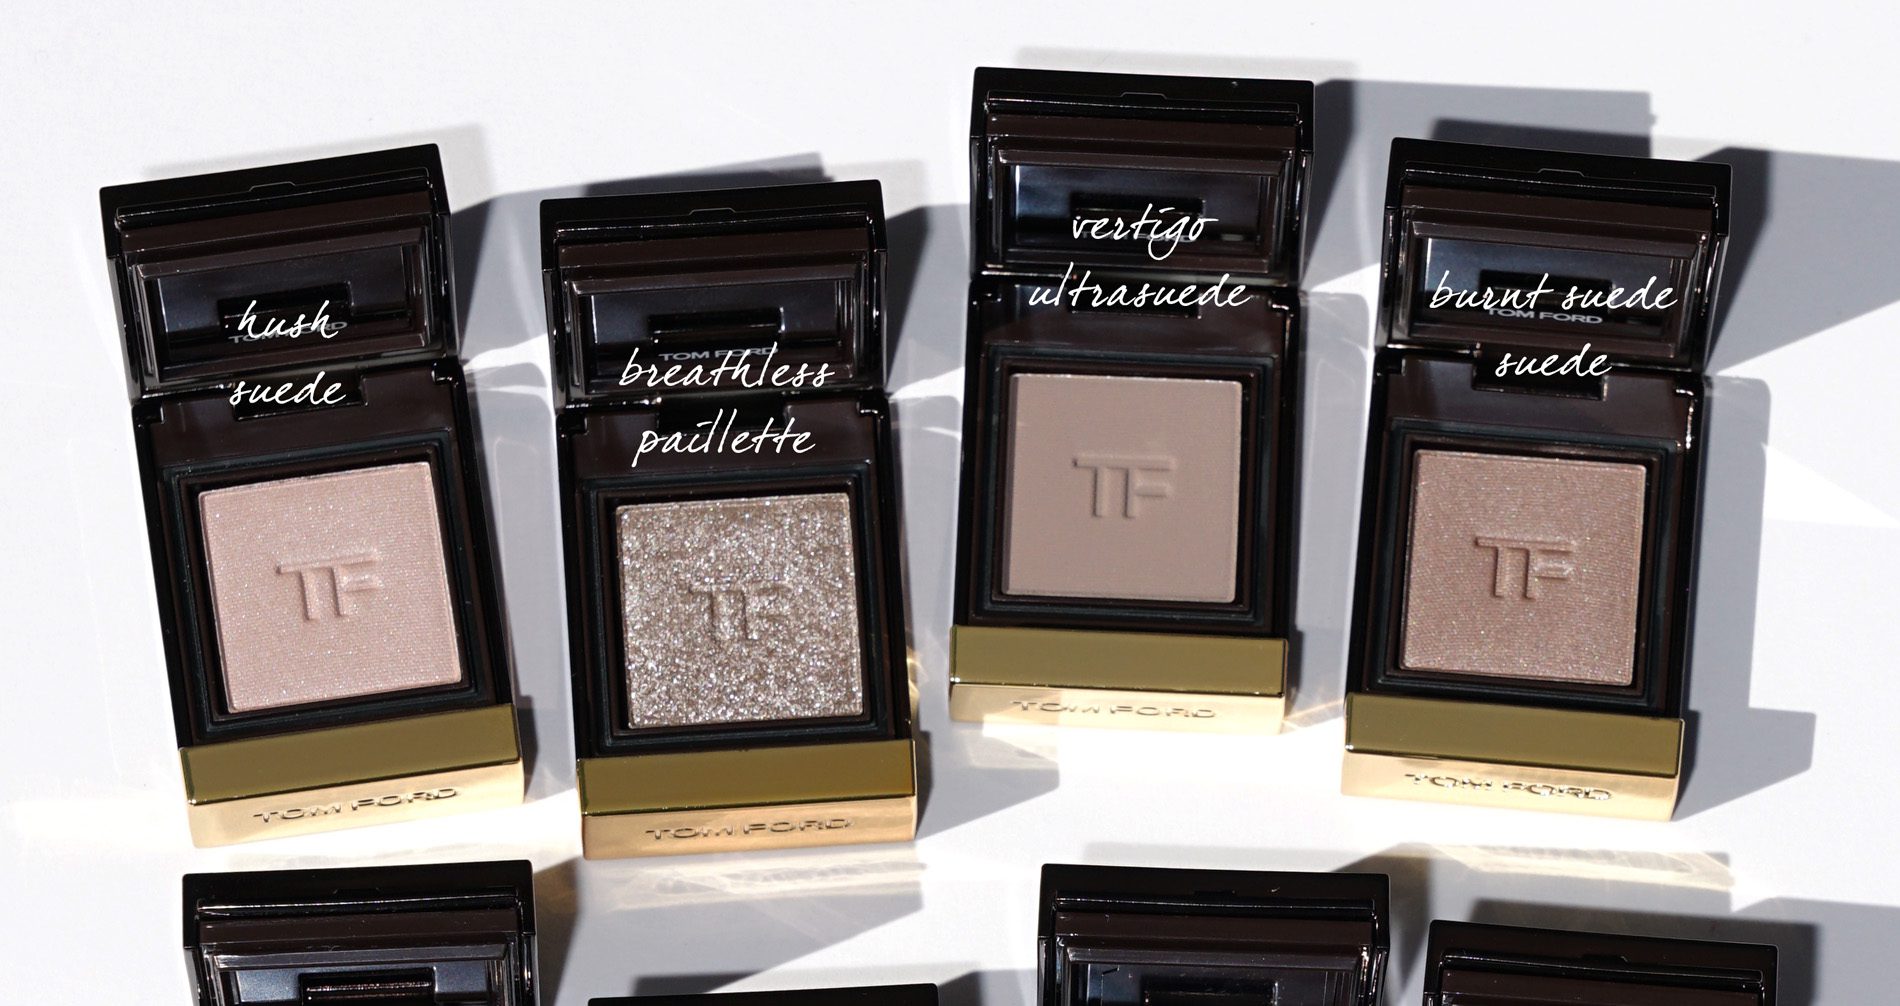 Tom Ford Private Shadows and New Mascara Launches - The Beauty 